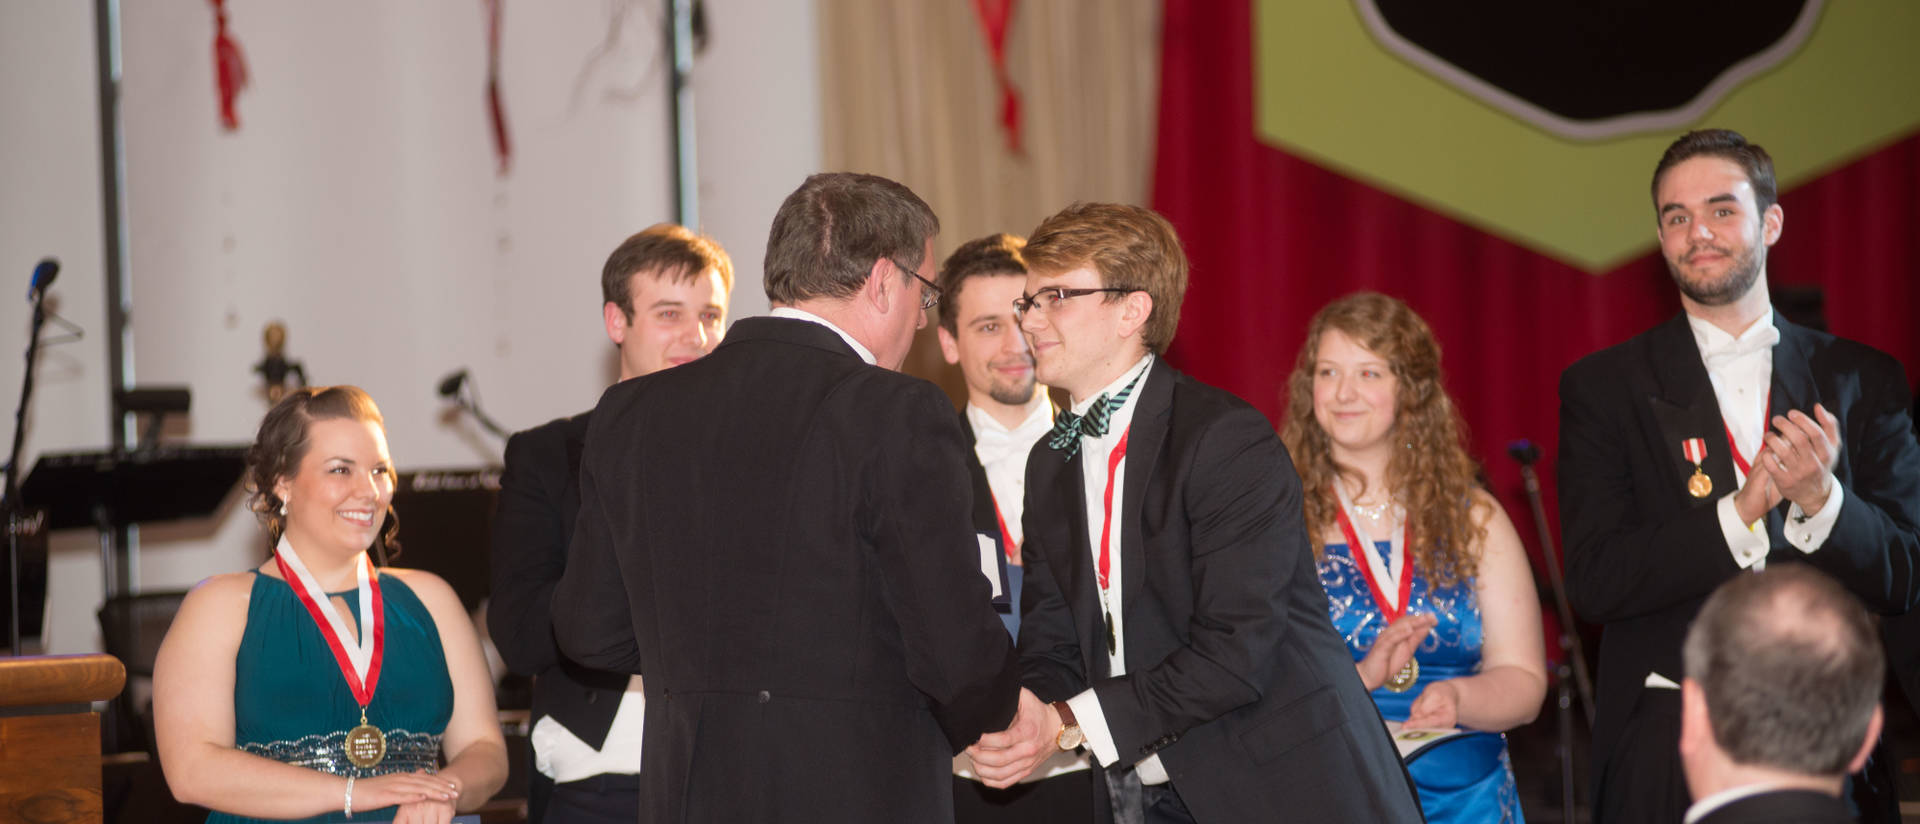 Students receiving scholarships at the annual Viennese Ball